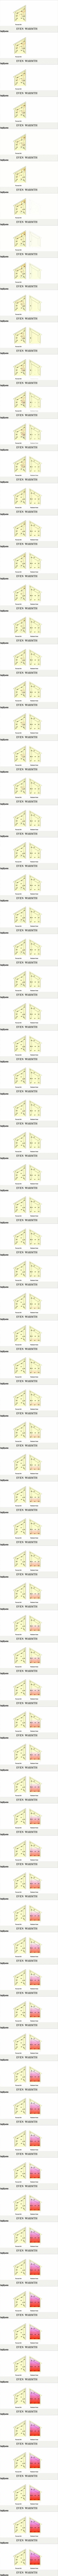 6 Animated gifs that show you how to warm up your cold basement